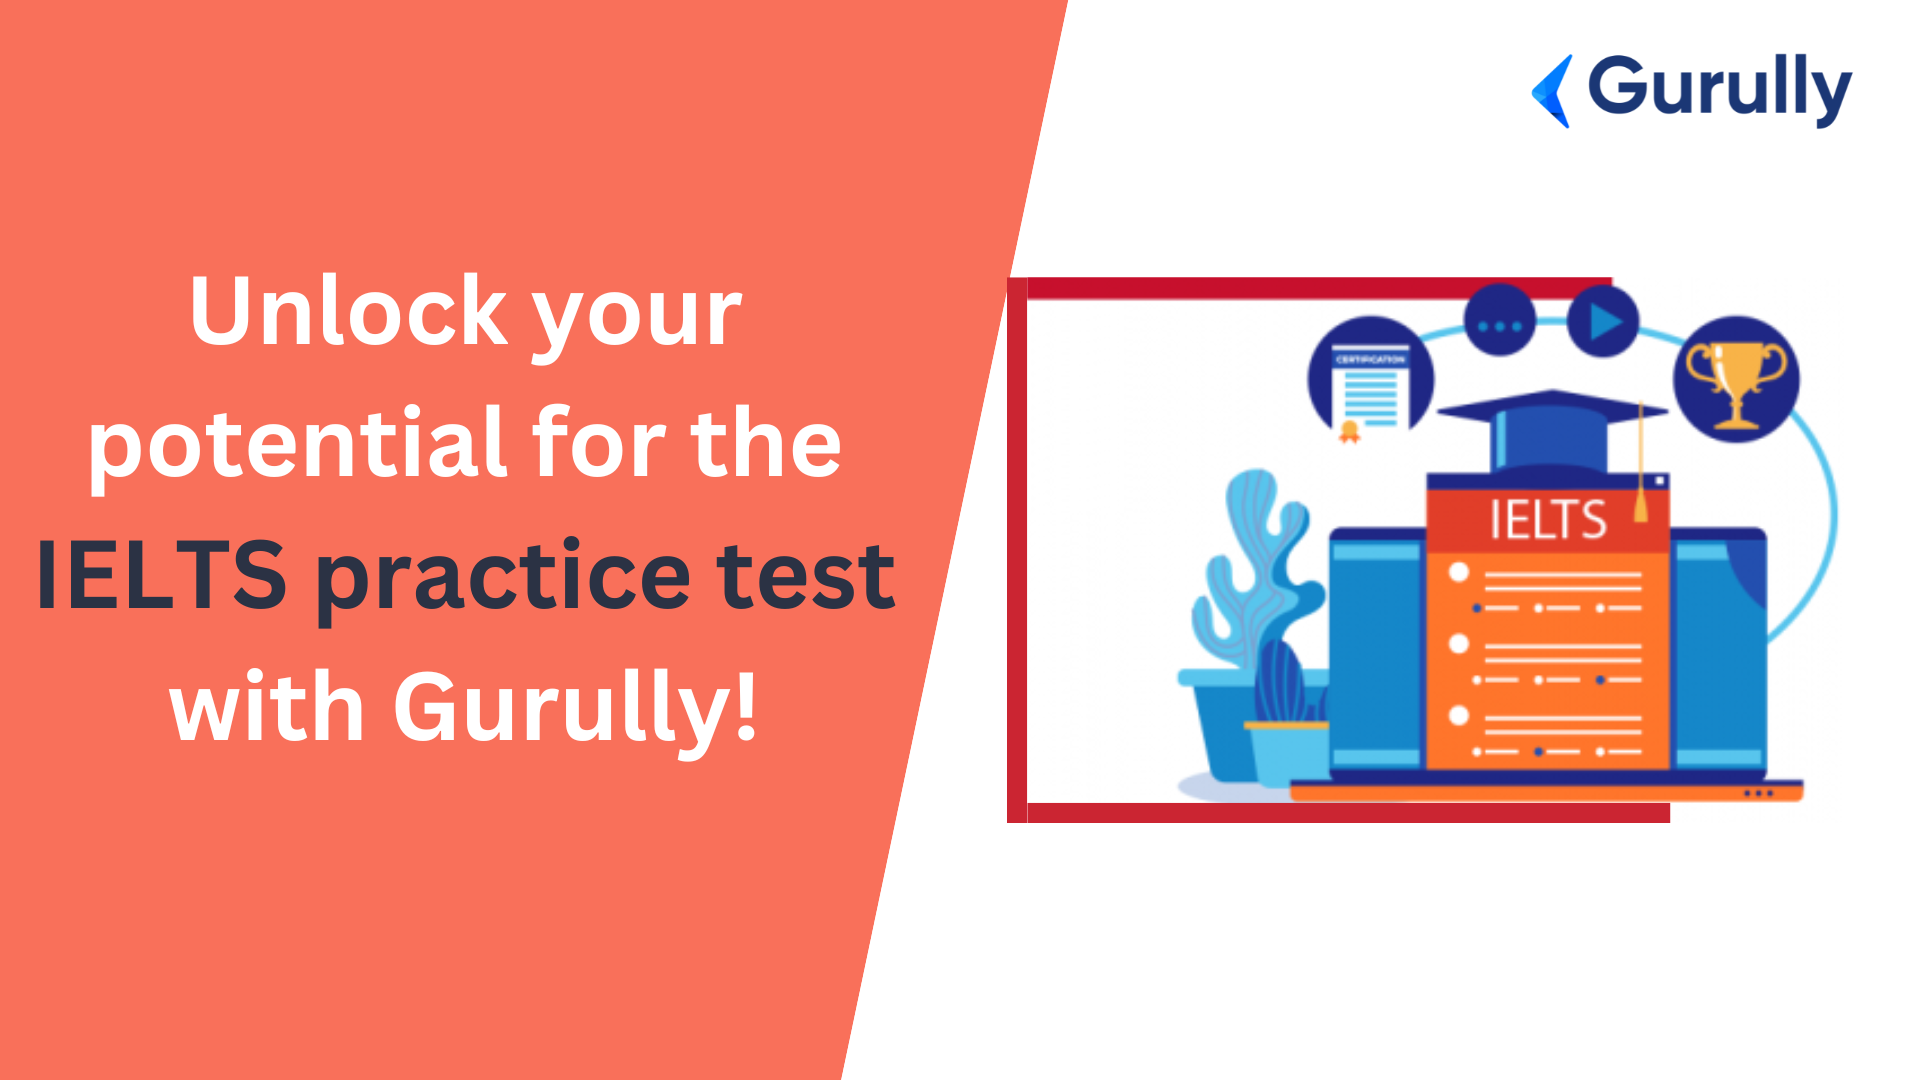 Unlock your potential for the IELTS practice test with Gurully!